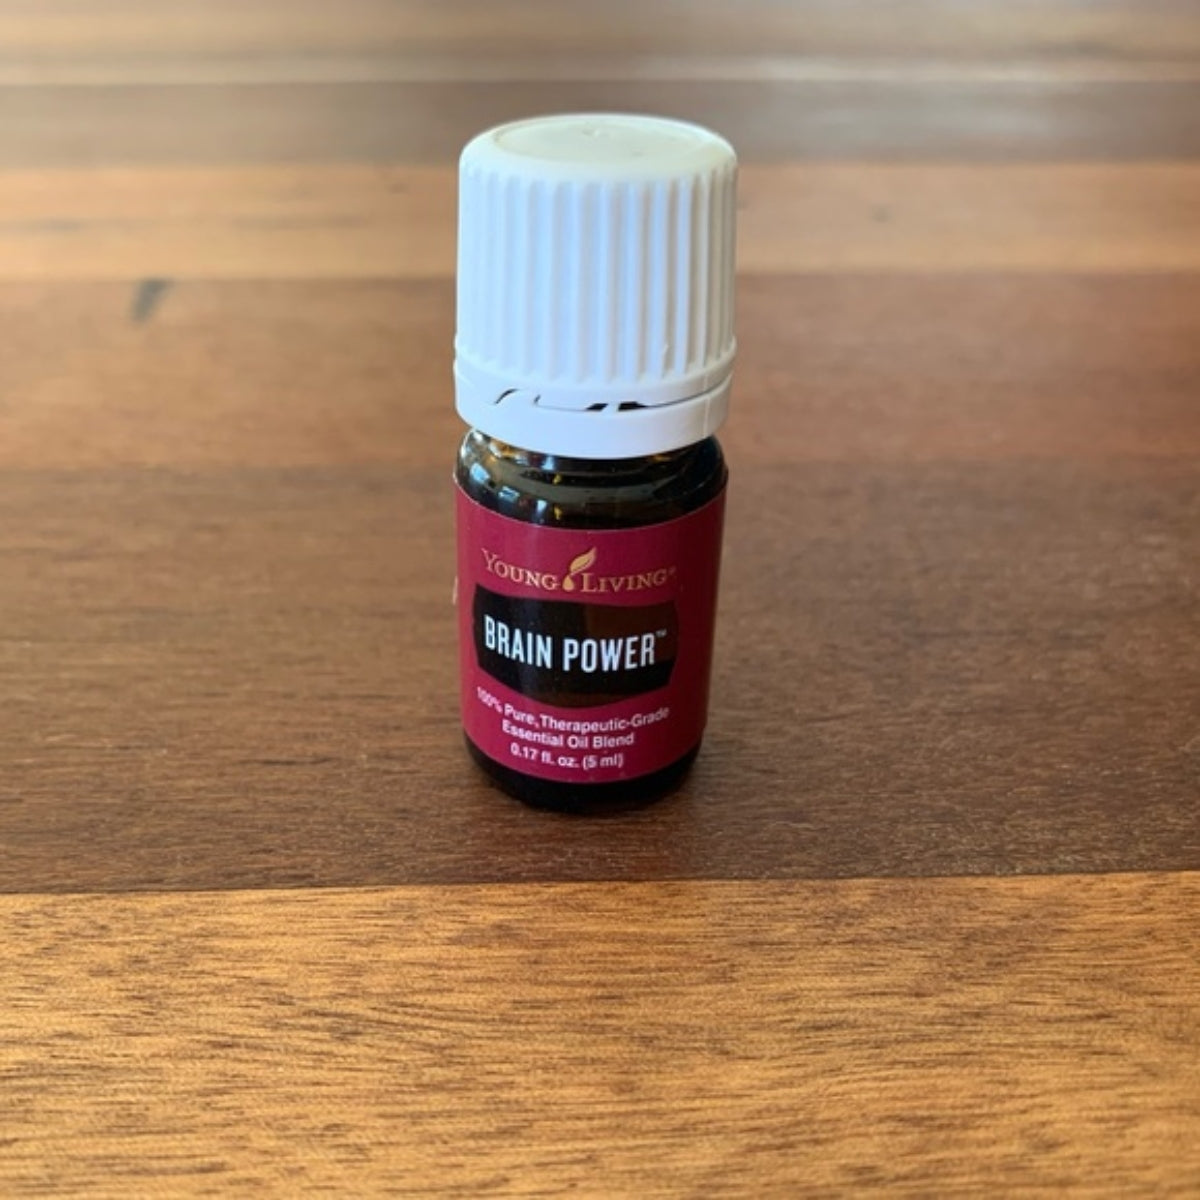 Young Living Brain Power Essential Oil Blend - 5ml